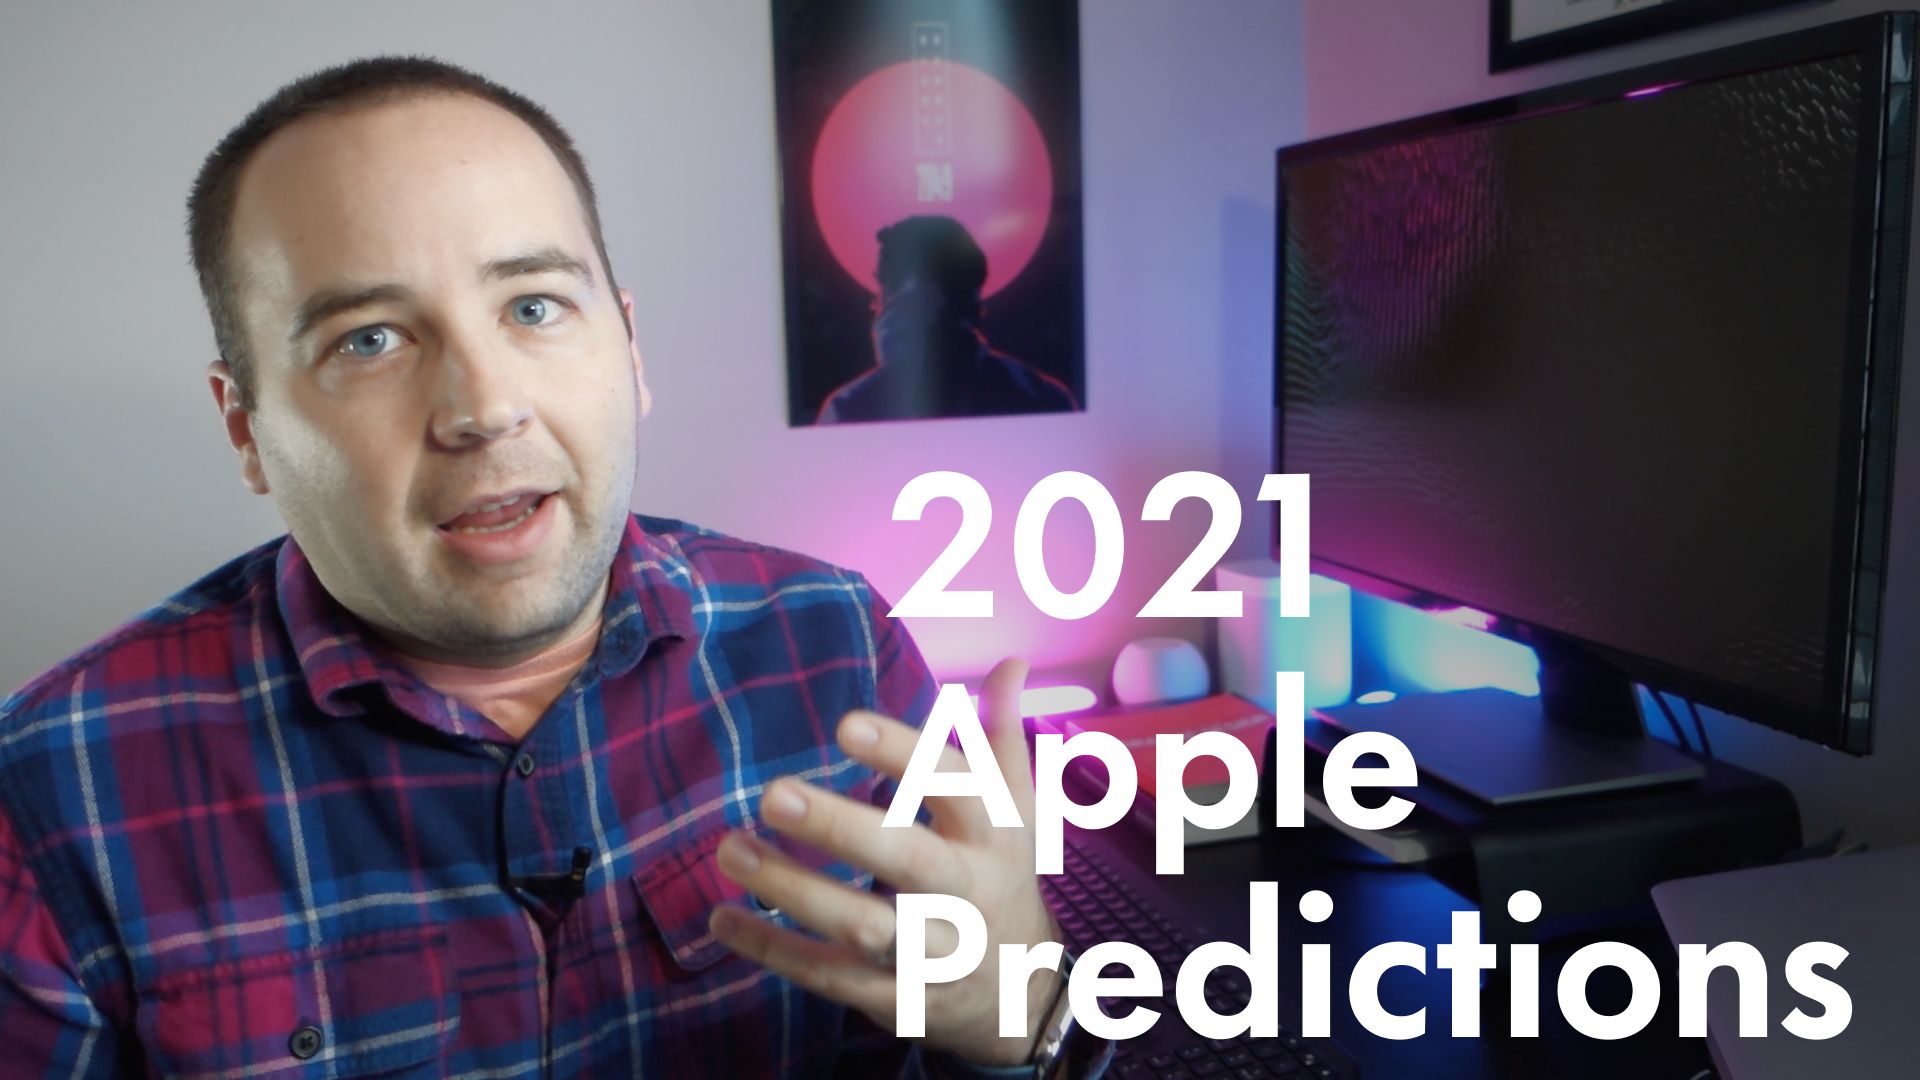 What is Apple going to do in 2021?